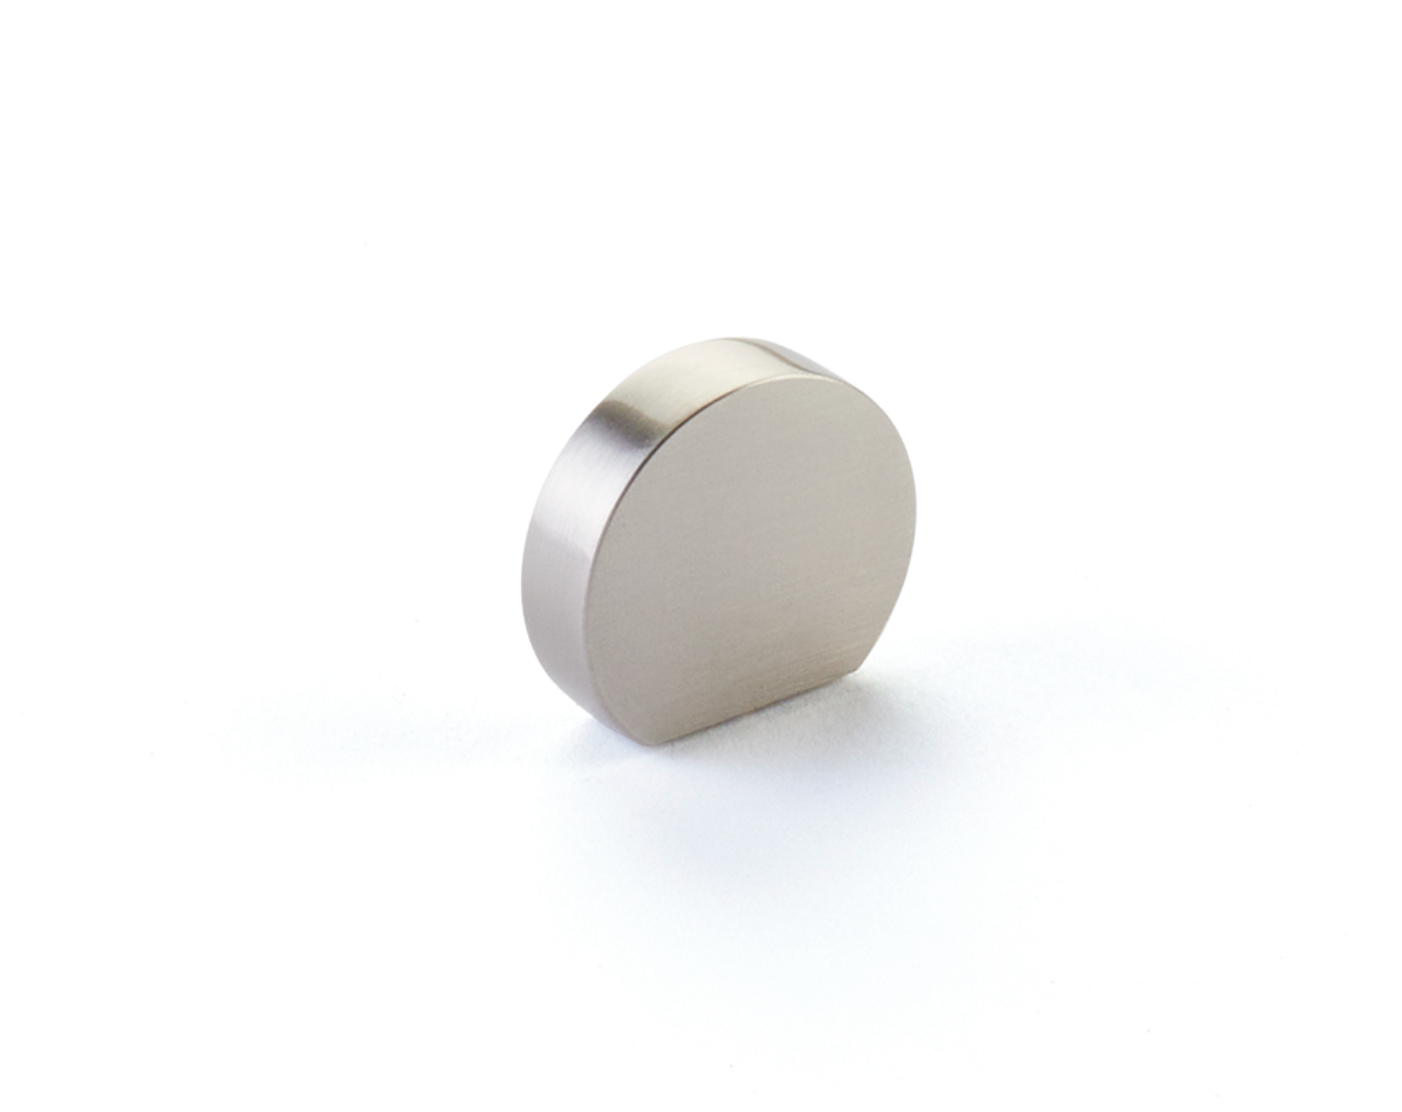 Brushed Nickel "Bit" Rounded Drawer Pulls and Cabinet Knobs